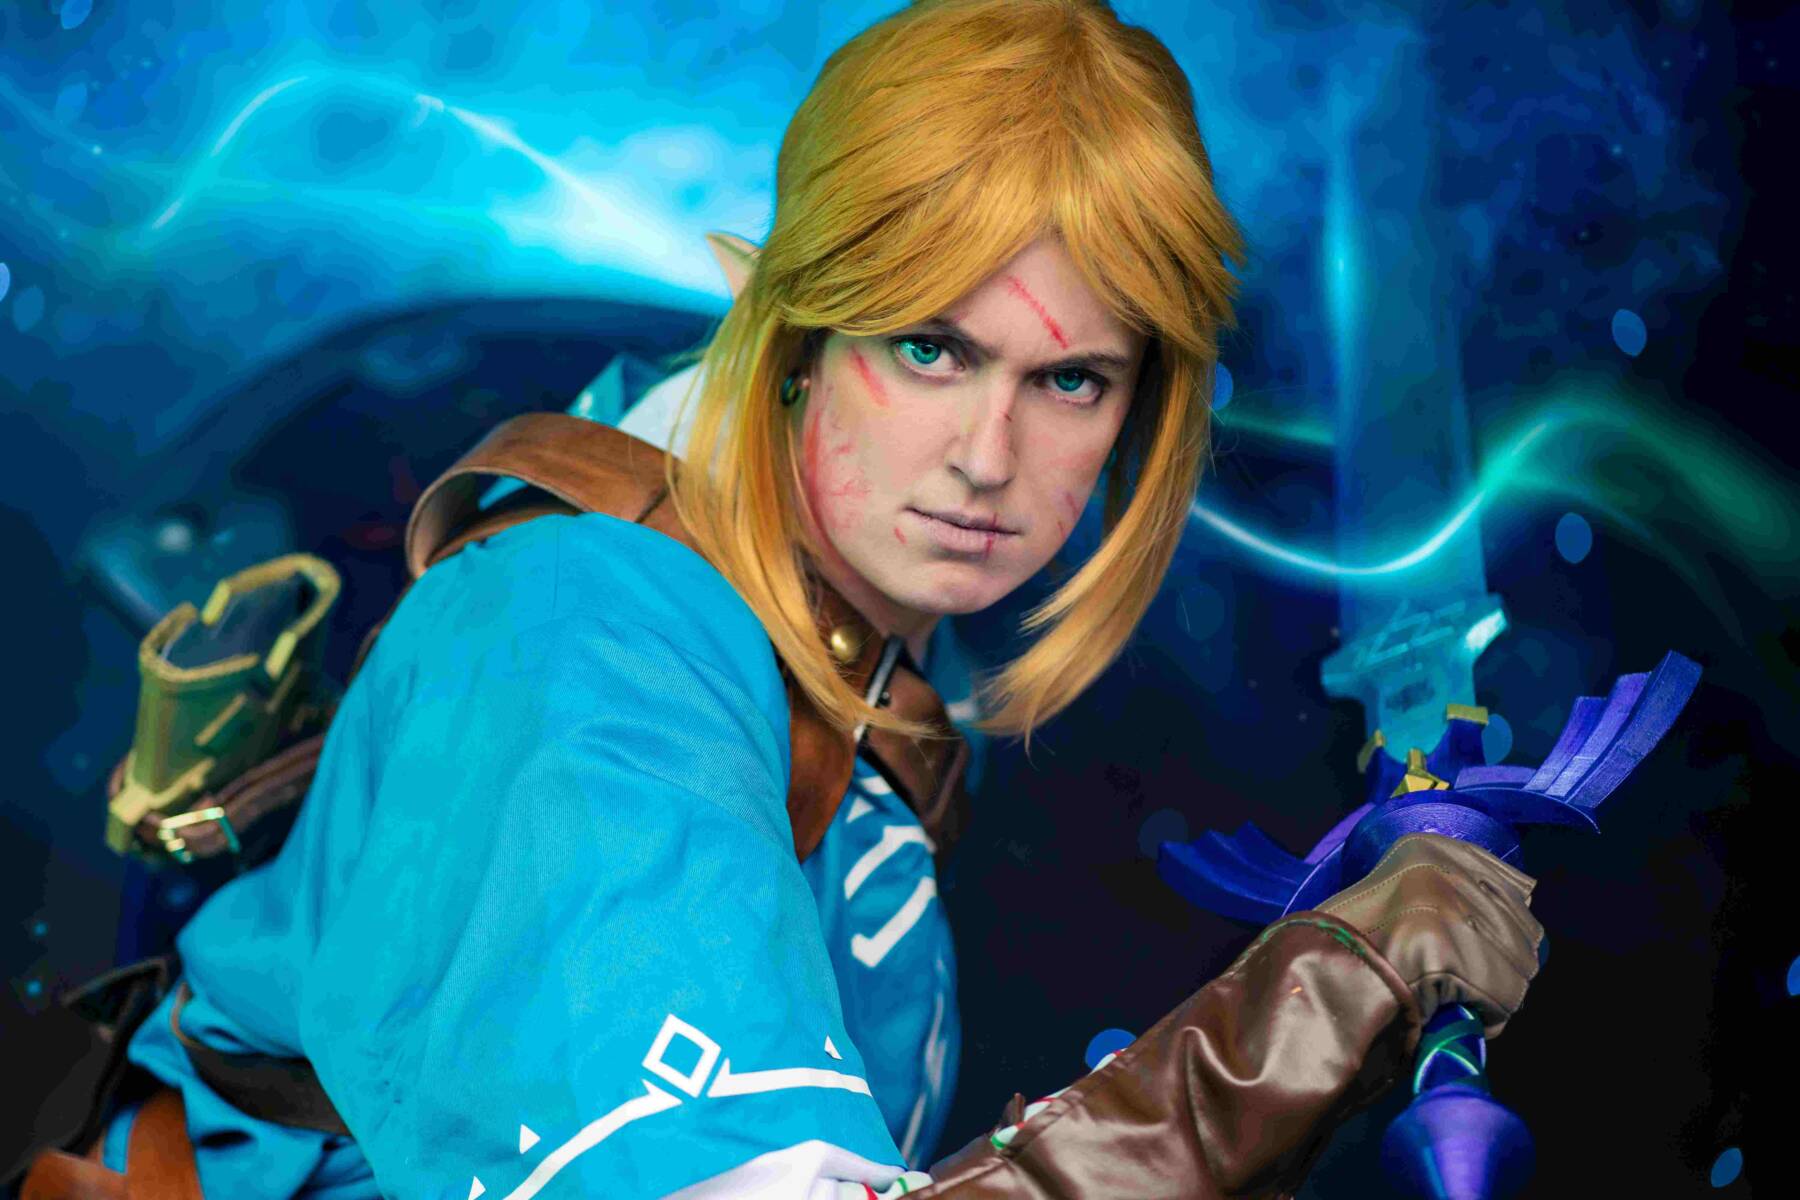 Link Breath of the Wild August Patreon Showcase 2022 86th Floor Cosplay and Cons